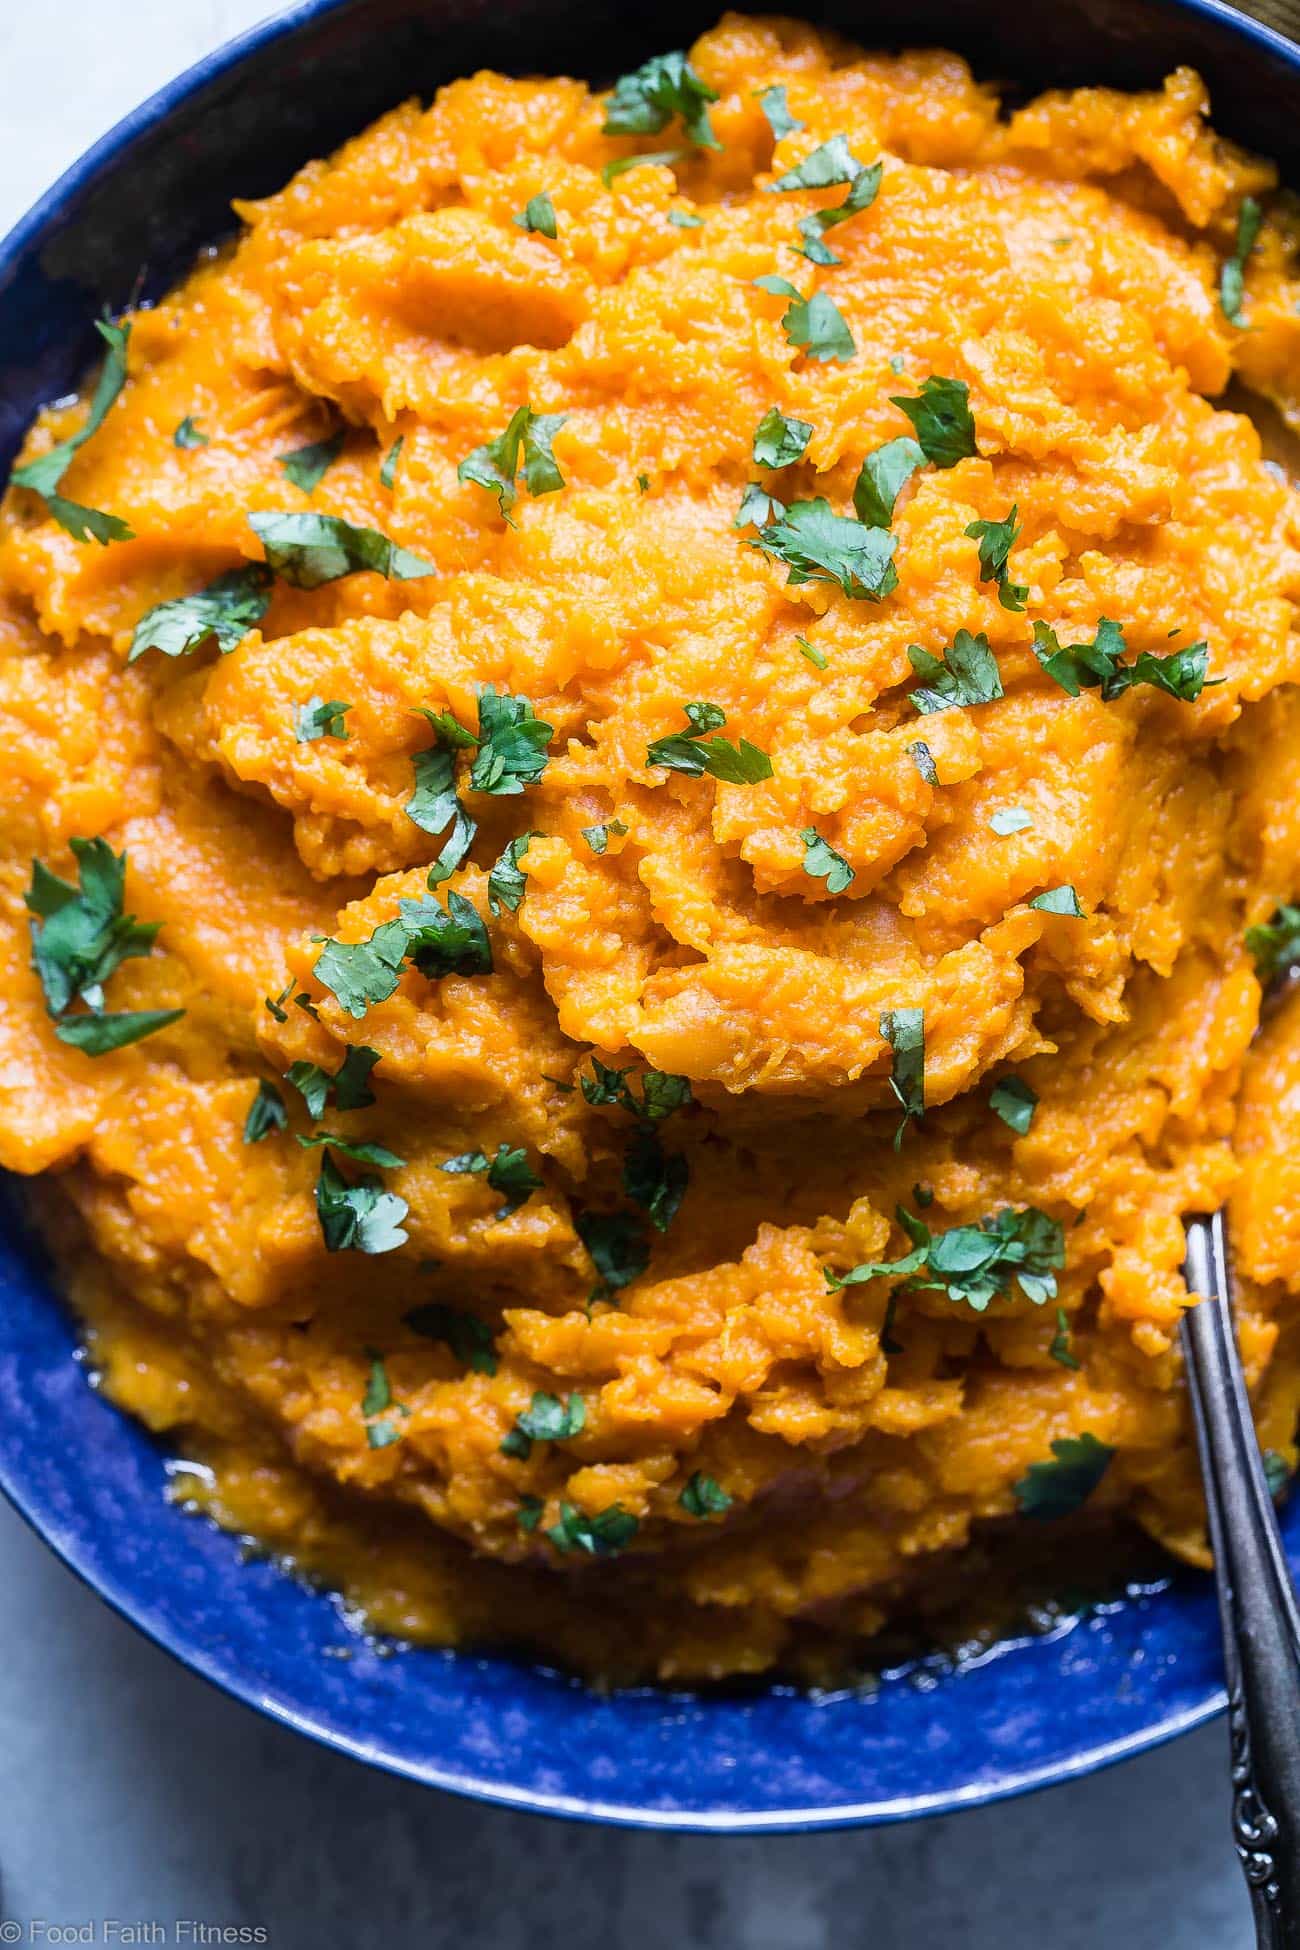 Coconut Curry Mashed Sweet Potatoes - This healthy mashed sweet potatoes recipe is a sweet and spicy spin on a holiday classic!  So creamy you will never believe they are dairy, grain and gluten free and paleo/vegan/whole30 compliant! | Foodfaithfitness.com | @FoodFaithFit